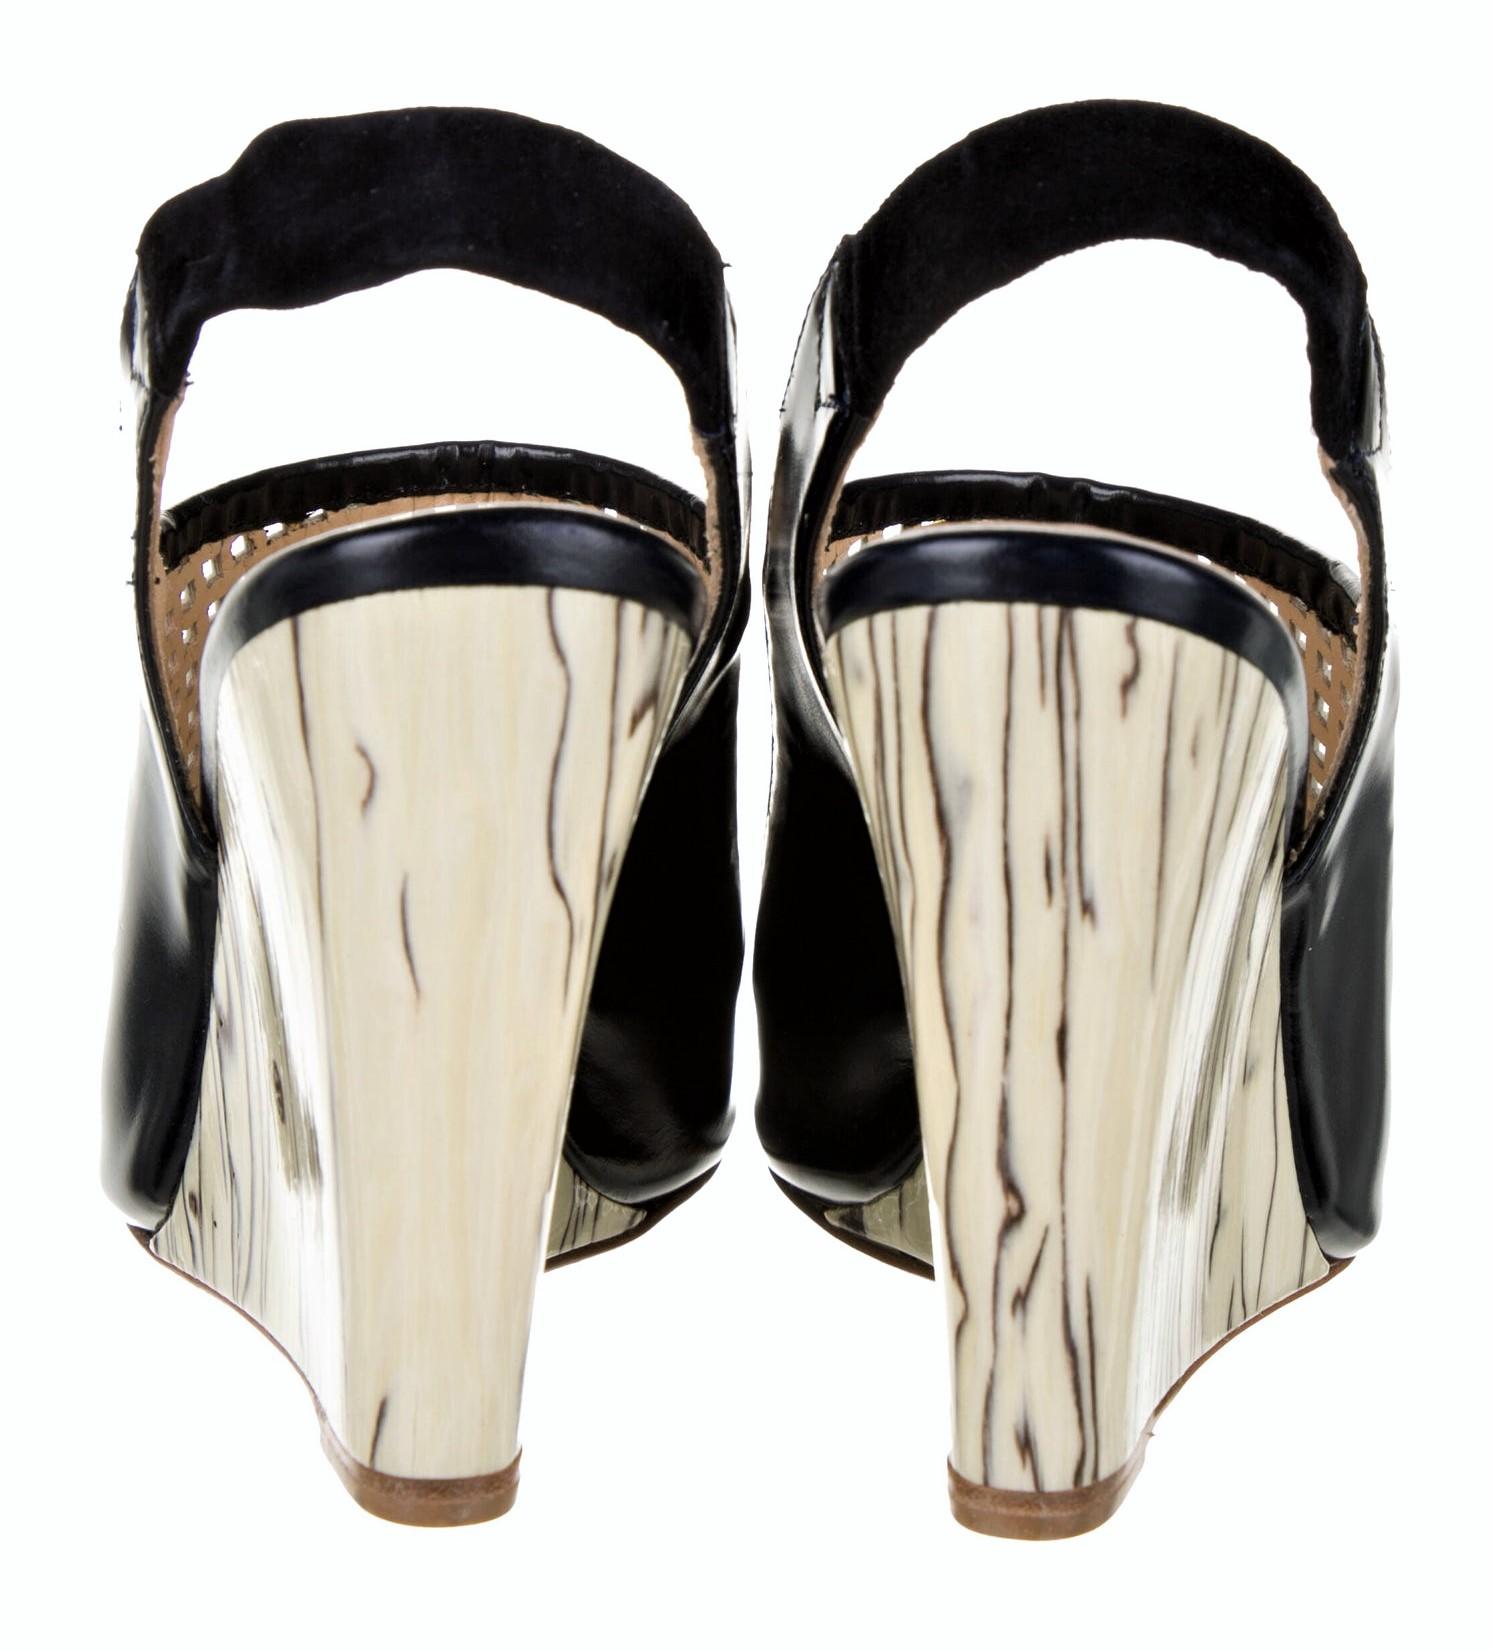 Eugenia Kim
$695
* Beautiful Dark Navy & Cream Leather Wedge
Perforated Leather Toe
Marbled Lacquered Heel
* Eugenia Kim did a limited collection of stunning shoes 
* Size: 39 (these run a half size small, so a U.S. 8.5)
* Wedge
Heels: 4.25